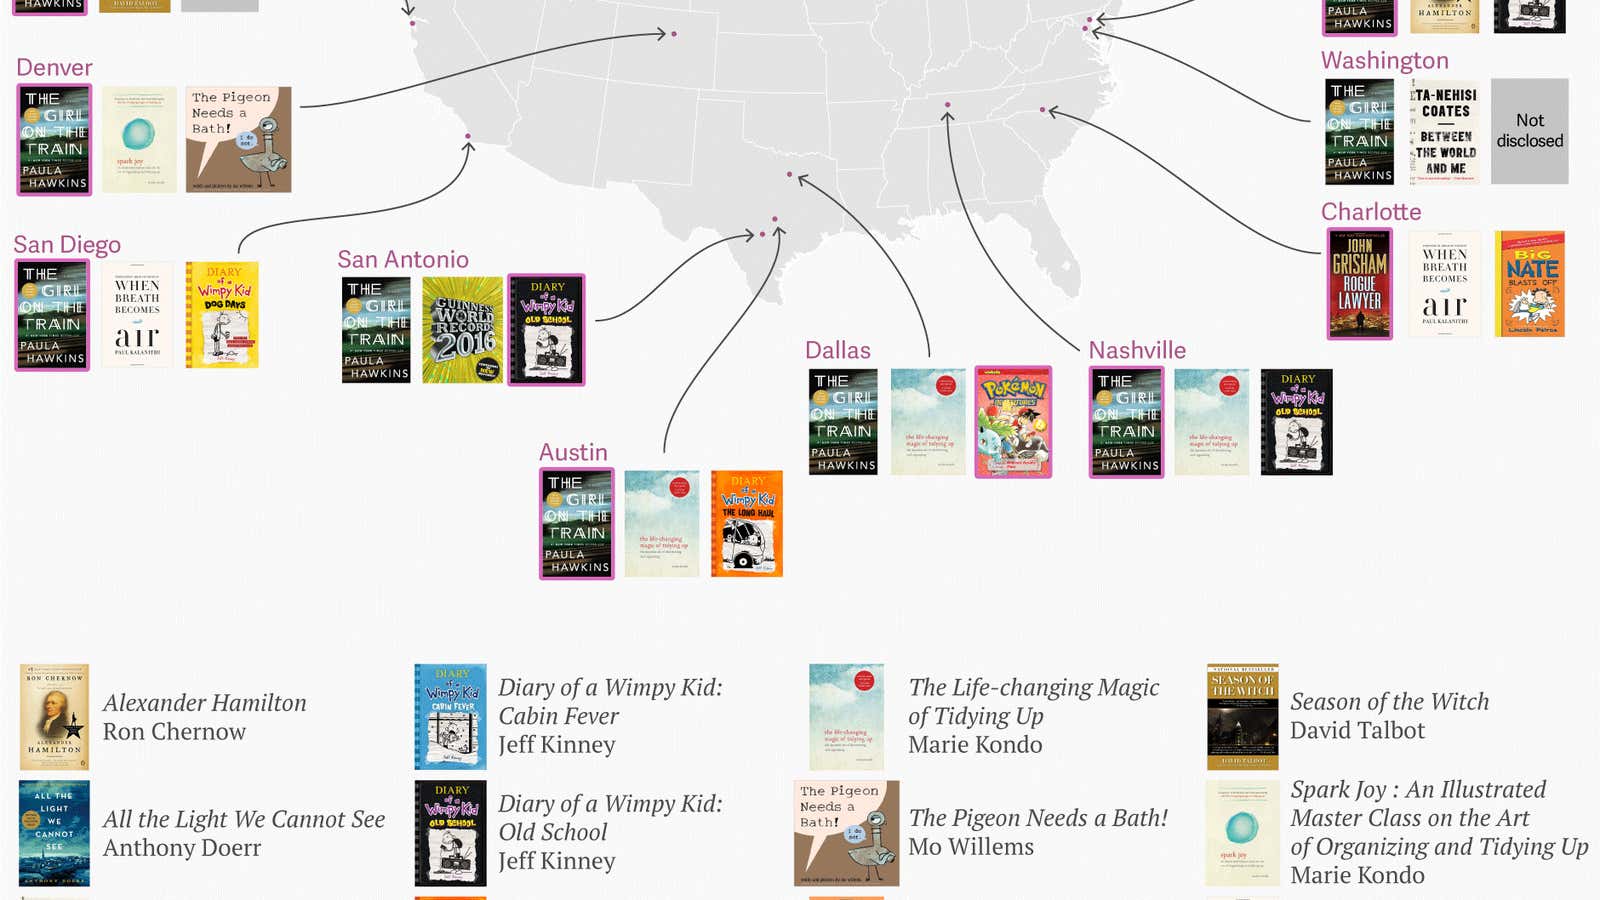 The most popular books at US public libraries this year, mapped by city